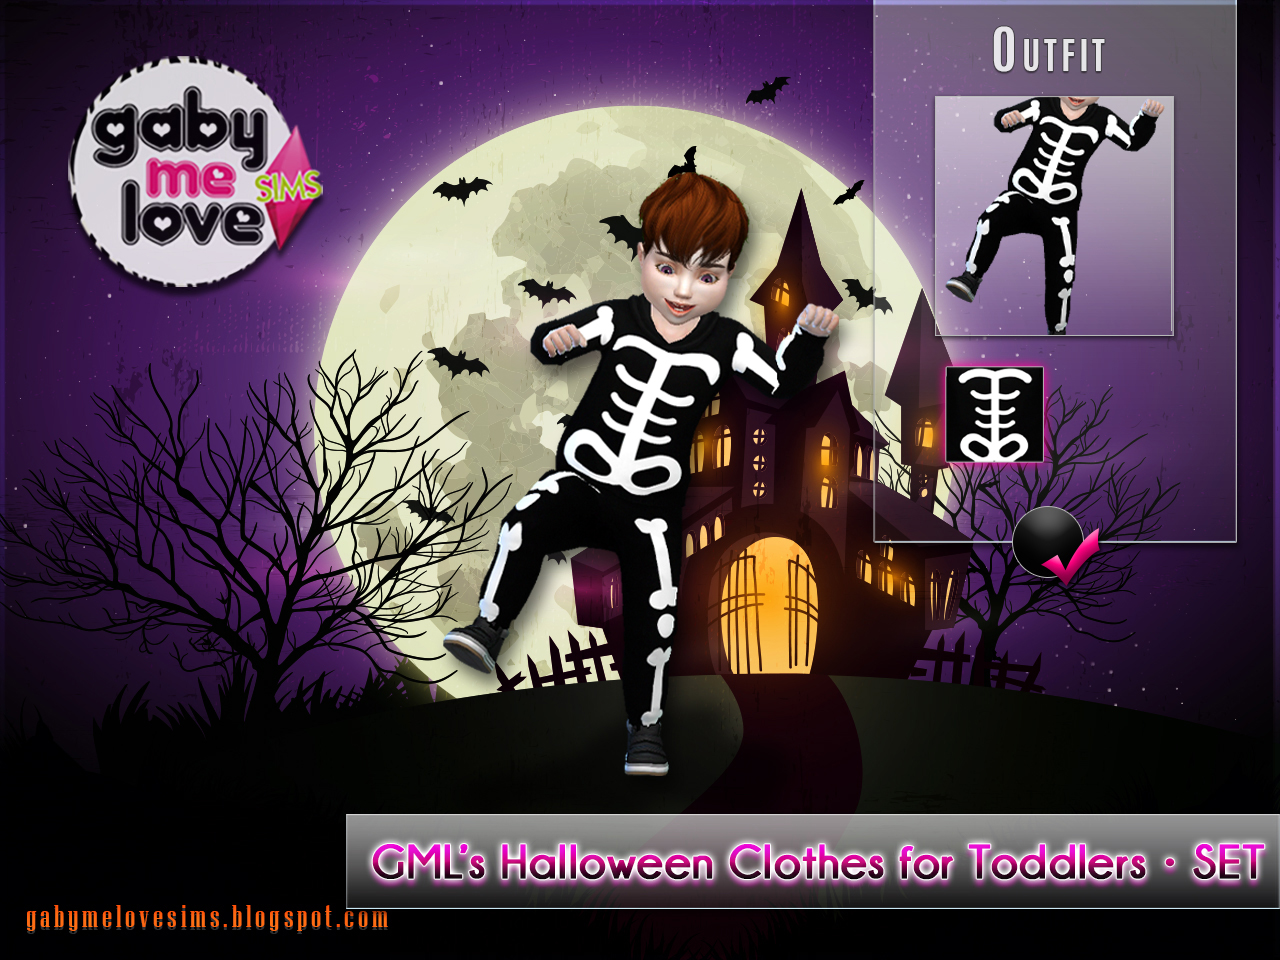 [Gabymelove Sims] GML’s Halloween Clothes for Toddlers • SET (2)